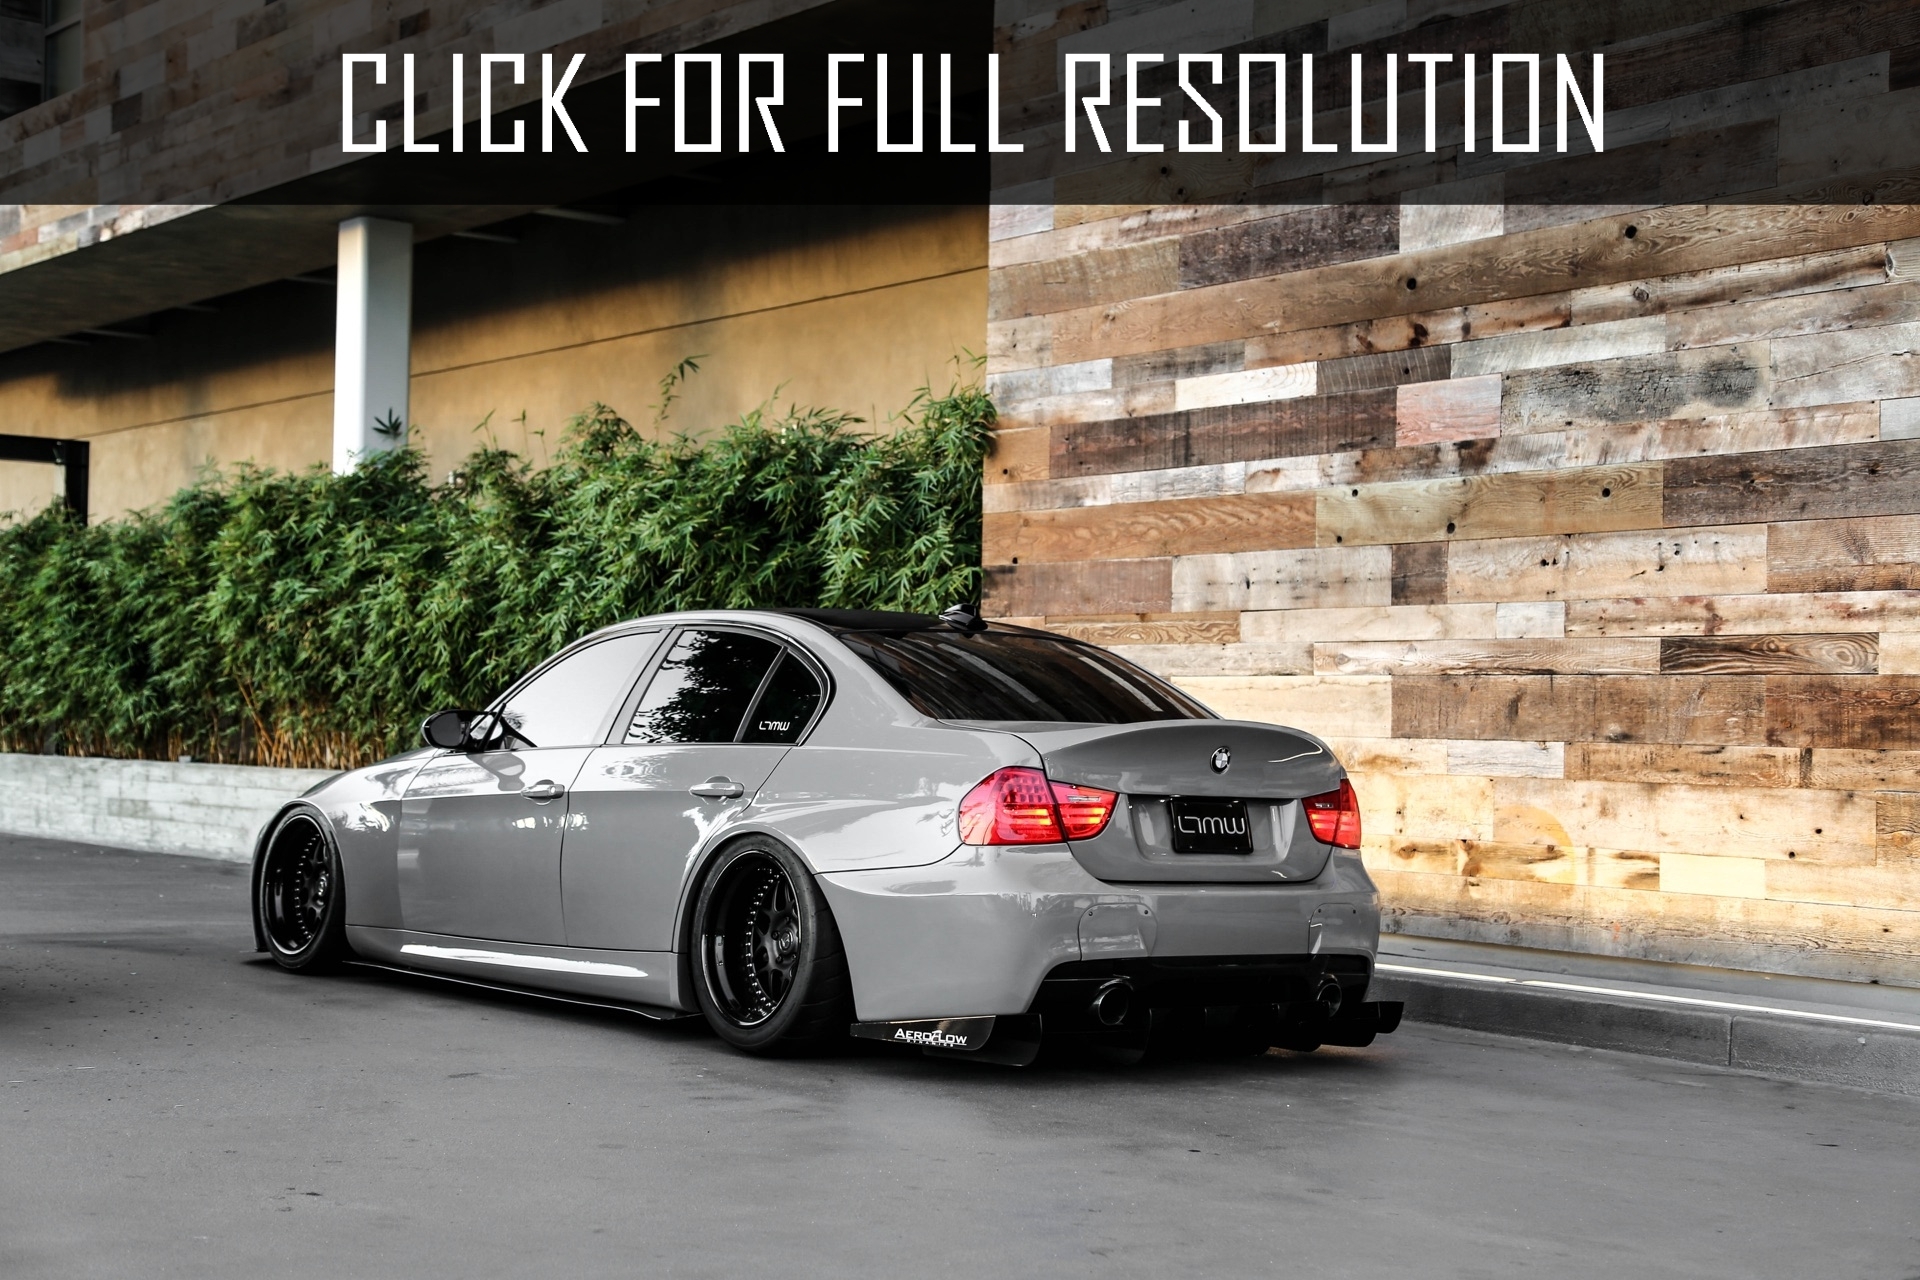 Bmw E90 335i amazing photo gallery, some information and